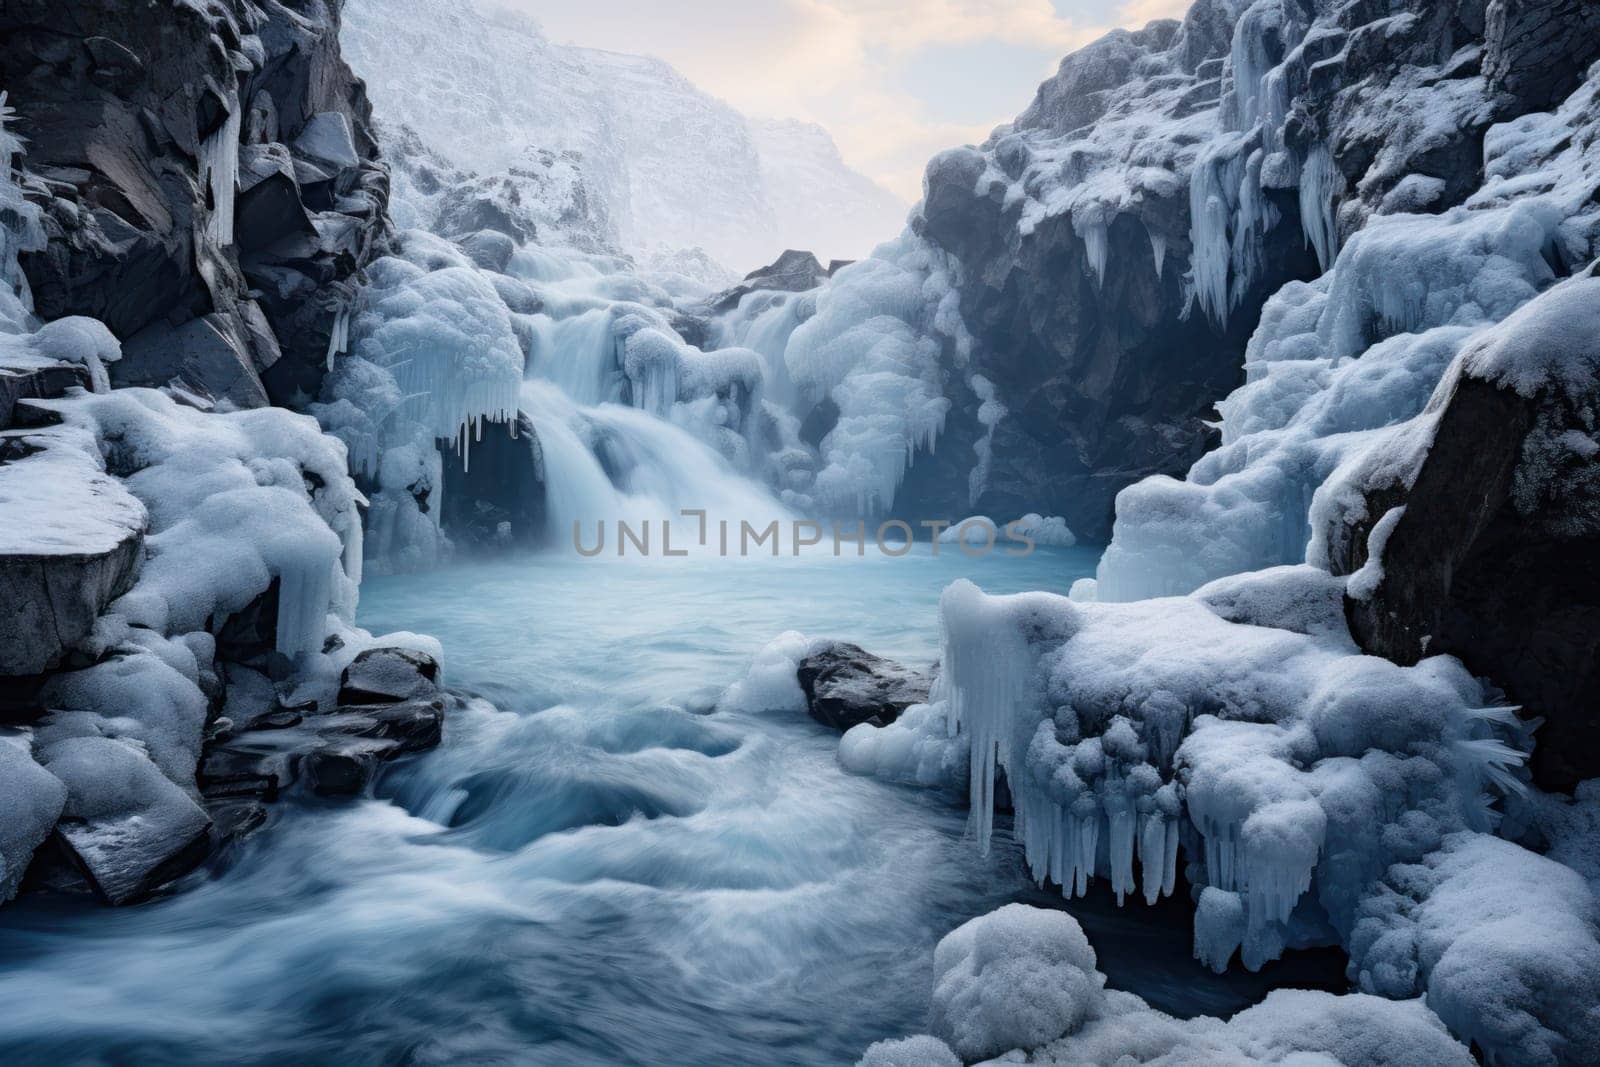 A mesmerizing display of the winter landscape, focusing on the distinctive and captivating frozen waterfalls found in chilly regions.